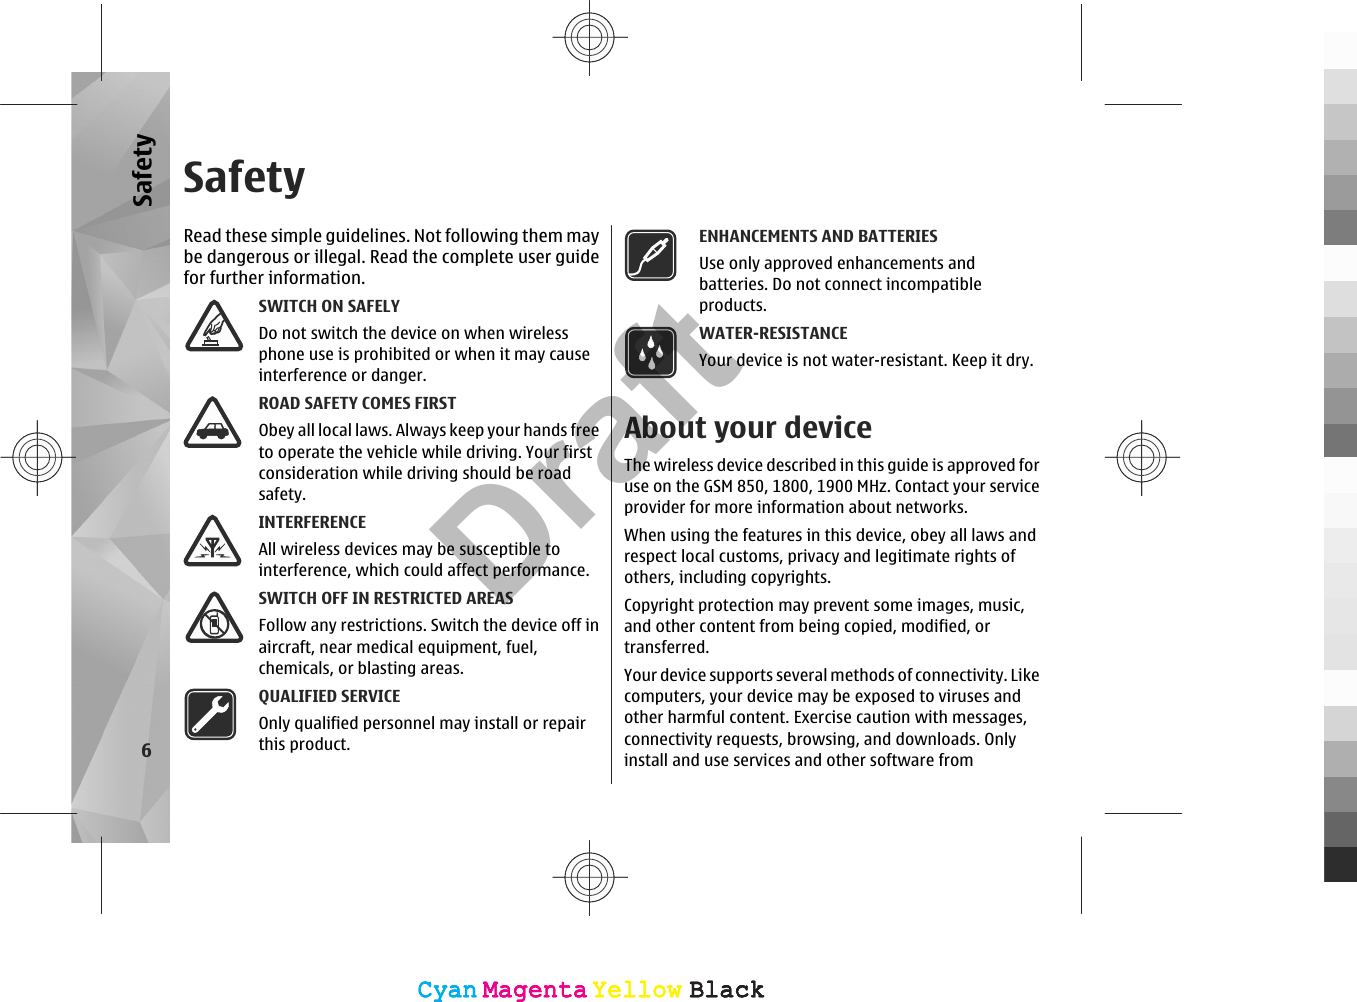 SafetyRead these simple guidelines. Not following them maybe dangerous or illegal. Read the complete user guidefor further information.SWITCH ON SAFELYDo not switch the device on when wirelessphone use is prohibited or when it may causeinterference or danger.ROAD SAFETY COMES FIRSTObey all local laws. Always keep your hands freeto operate the vehicle while driving. Your firstconsideration while driving should be roadsafety.INTERFERENCEAll wireless devices may be susceptible tointerference, which could affect performance.SWITCH OFF IN RESTRICTED AREASFollow any restrictions. Switch the device off inaircraft, near medical equipment, fuel,chemicals, or blasting areas.QUALIFIED SERVICEOnly qualified personnel may install or repairthis product.ENHANCEMENTS AND BATTERIESUse only approved enhancements andbatteries. Do not connect incompatibleproducts.WATER-RESISTANCEYour device is not water-resistant. Keep it dry.About your deviceThe wireless device described in this guide is approved foruse on the GSM 850, 1800, 1900 MHz. Contact your serviceprovider for more information about networks.When using the features in this device, obey all laws andrespect local customs, privacy and legitimate rights ofothers, including copyrights.Copyright protection may prevent some images, music,and other content from being copied, modified, ortransferred.Your device supports several methods of connectivity. Likecomputers, your device may be exposed to viruses andother harmful content. Exercise caution with messages,connectivity requests, browsing, and downloads. Onlyinstall and use services and other software from6SafetyCyanCyanMagentaMagentaYellowYellowBlackBlackCyanCyanMagentaMagentaYellowYellowBlackBlackDraft